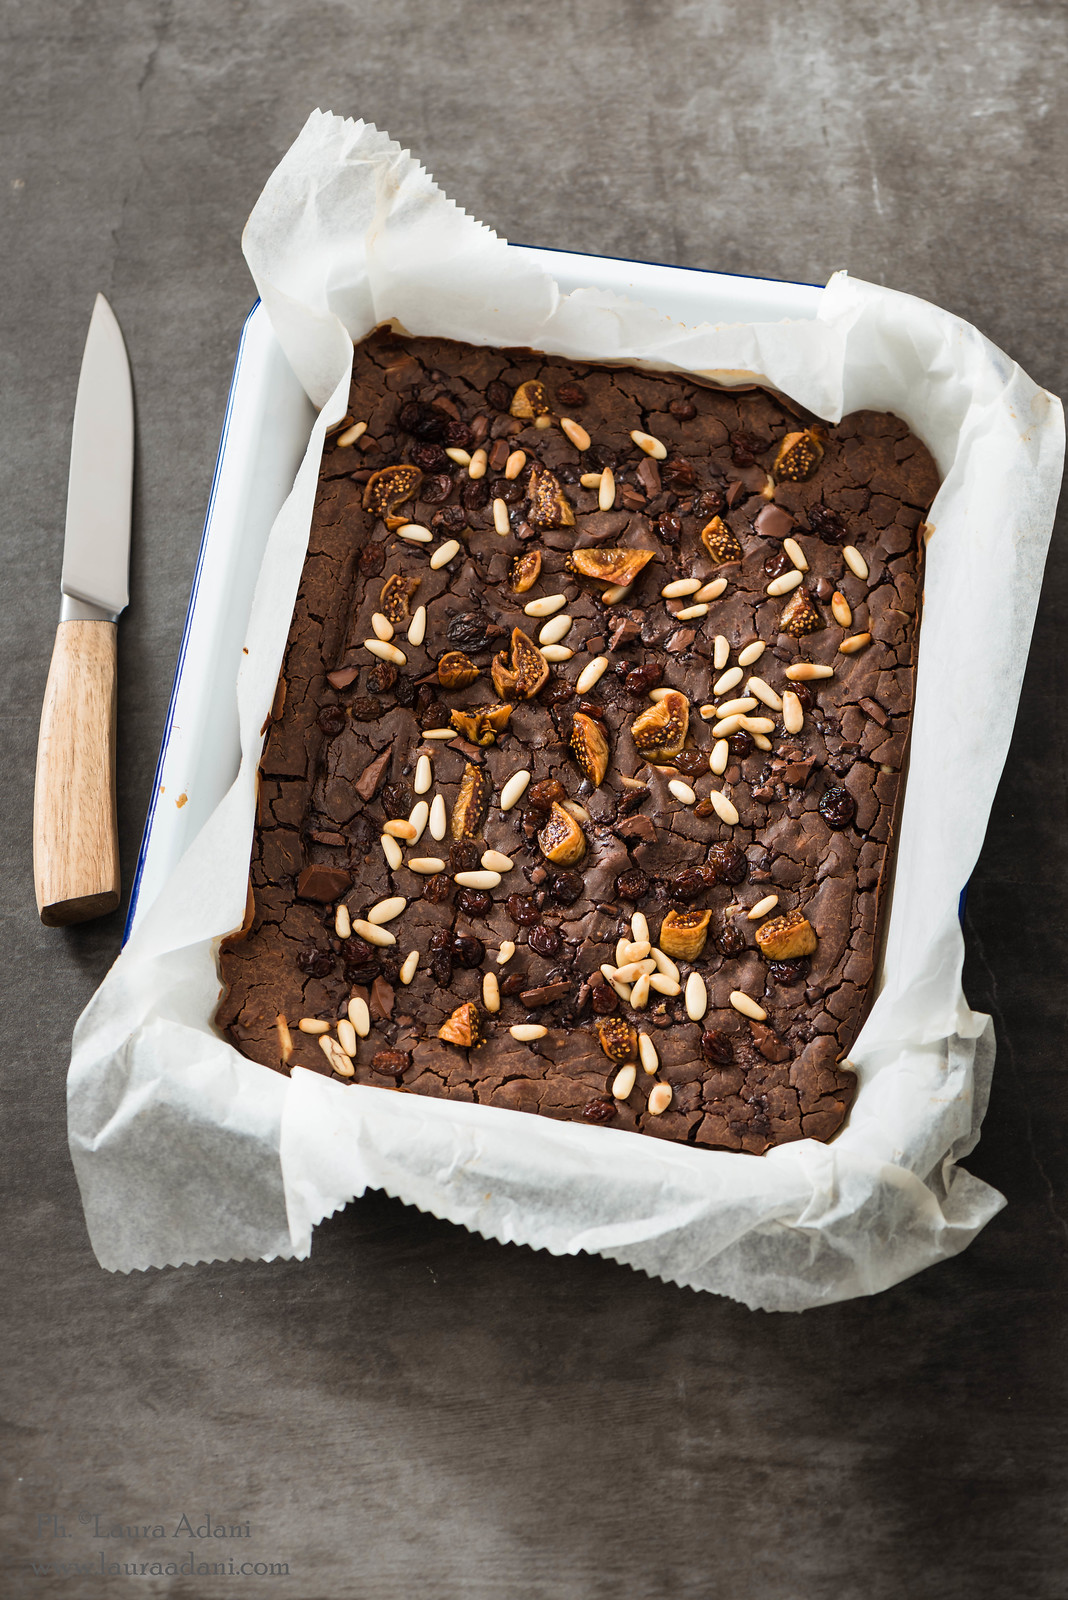 Chestnut cake with dried fruit - web-3399